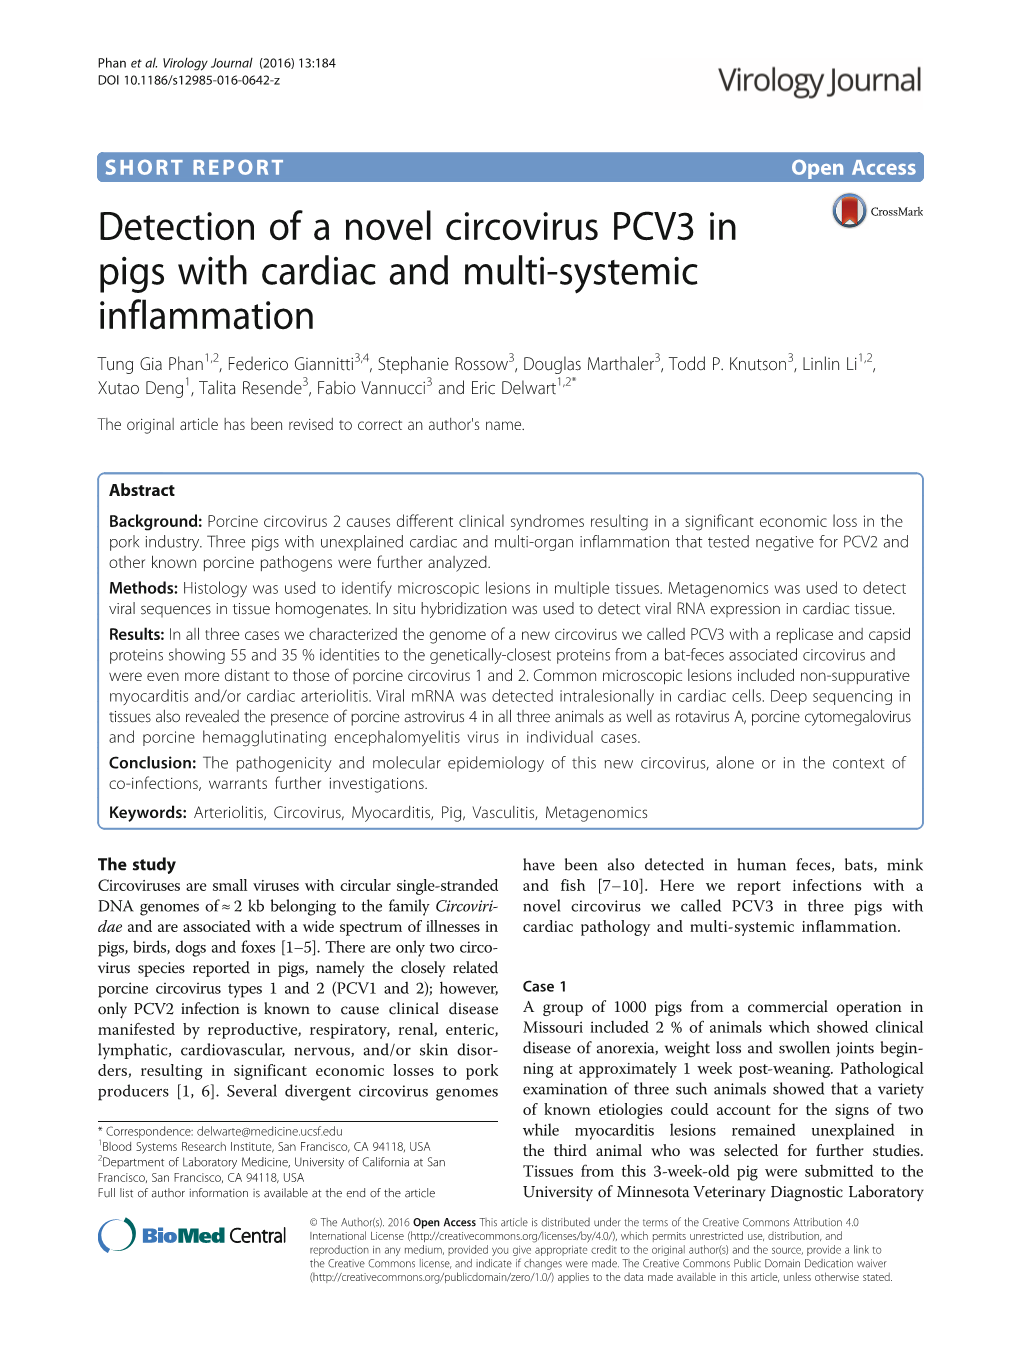 Detection of a Novel Circovirus PCV3 in Pigs with Cardiac and Multi